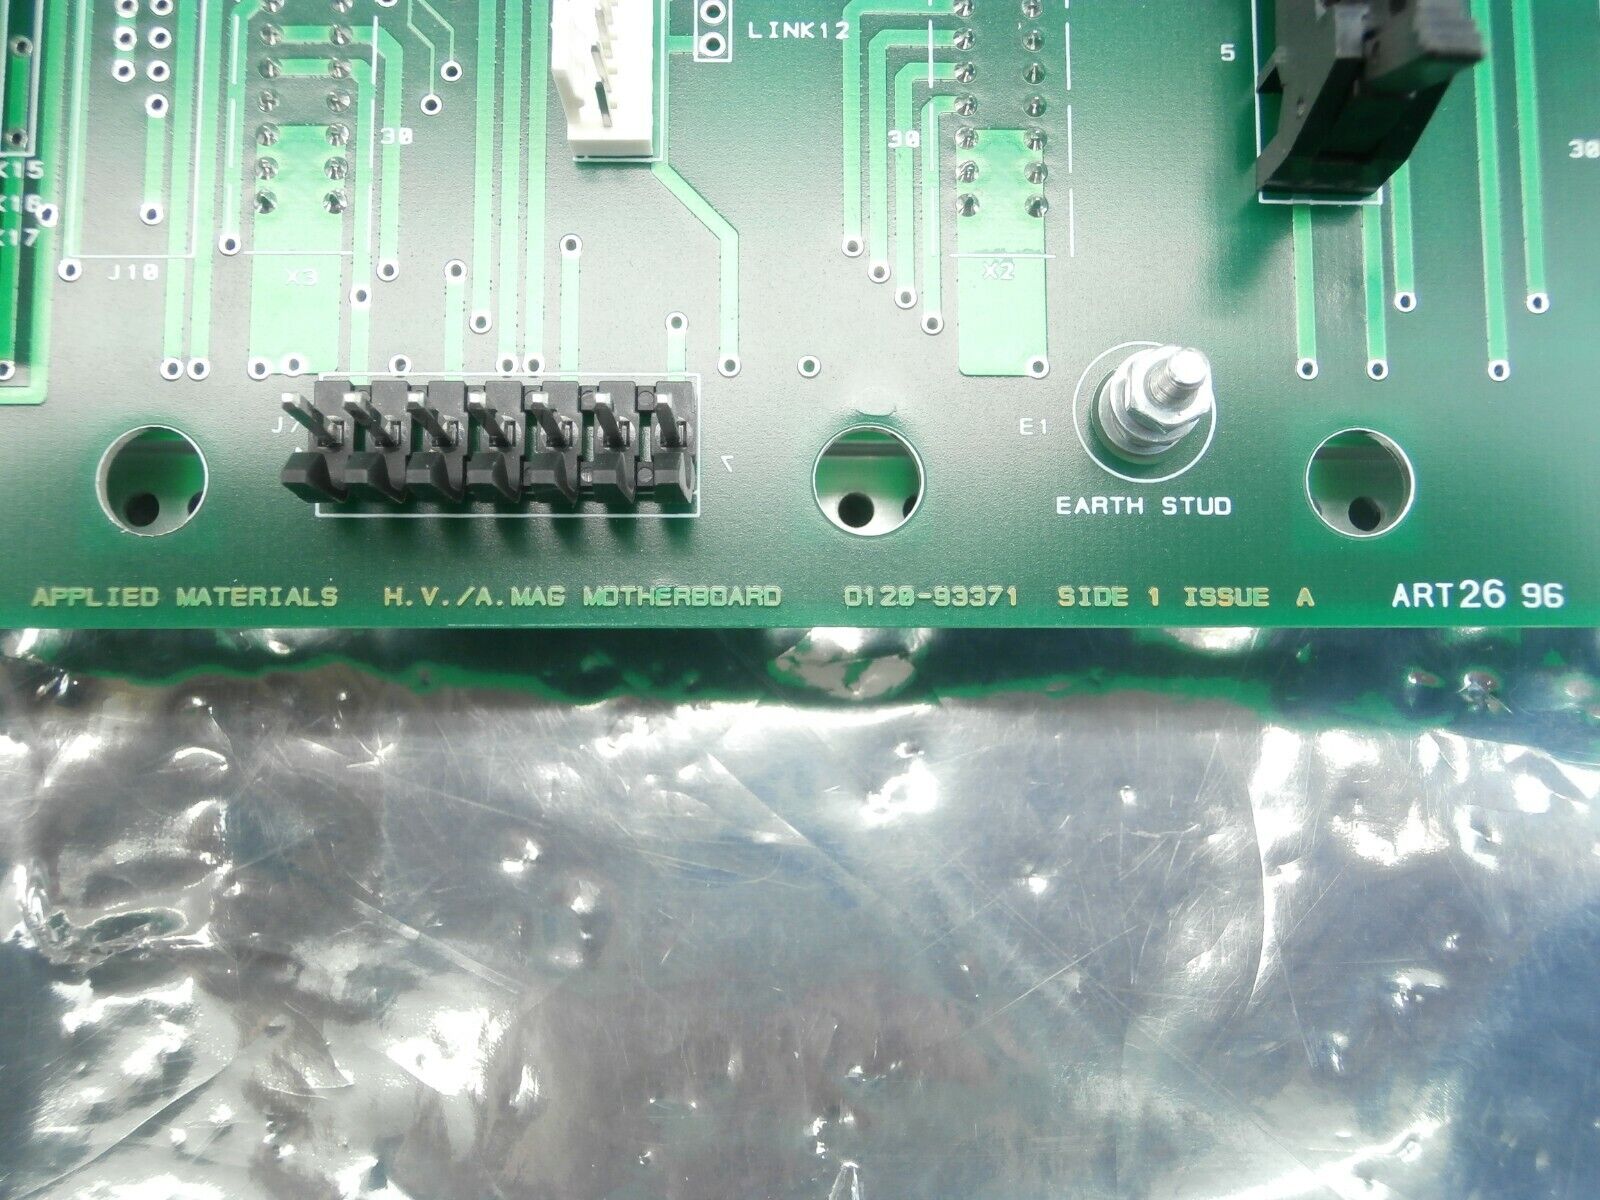 AMAT Applied Materials 0100-90851 H.V/A.MAG Motherboard PCB 0100-90015 Issue E